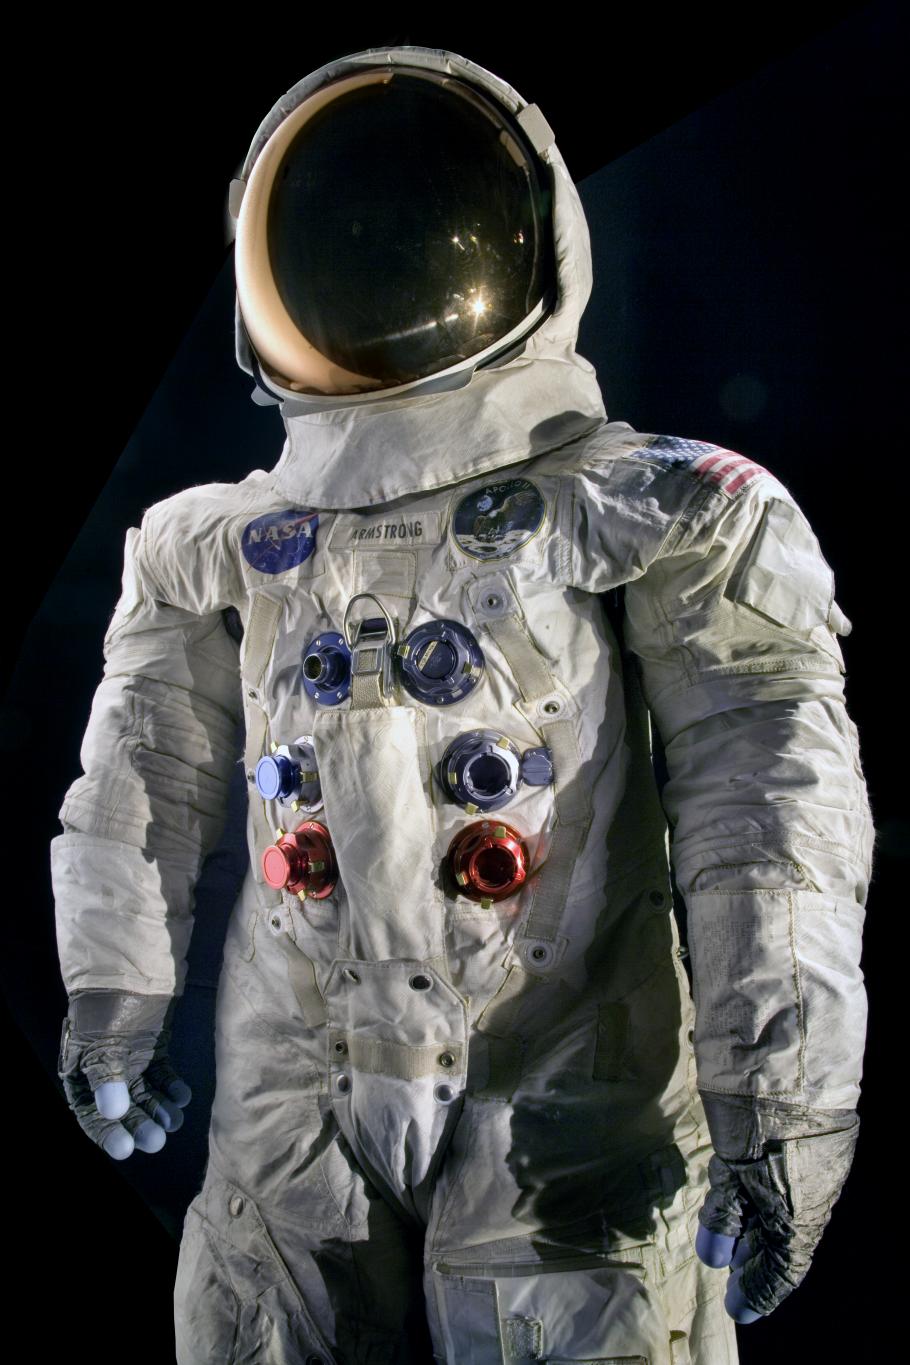 Armstrong's Apollo 11 Spacesuit